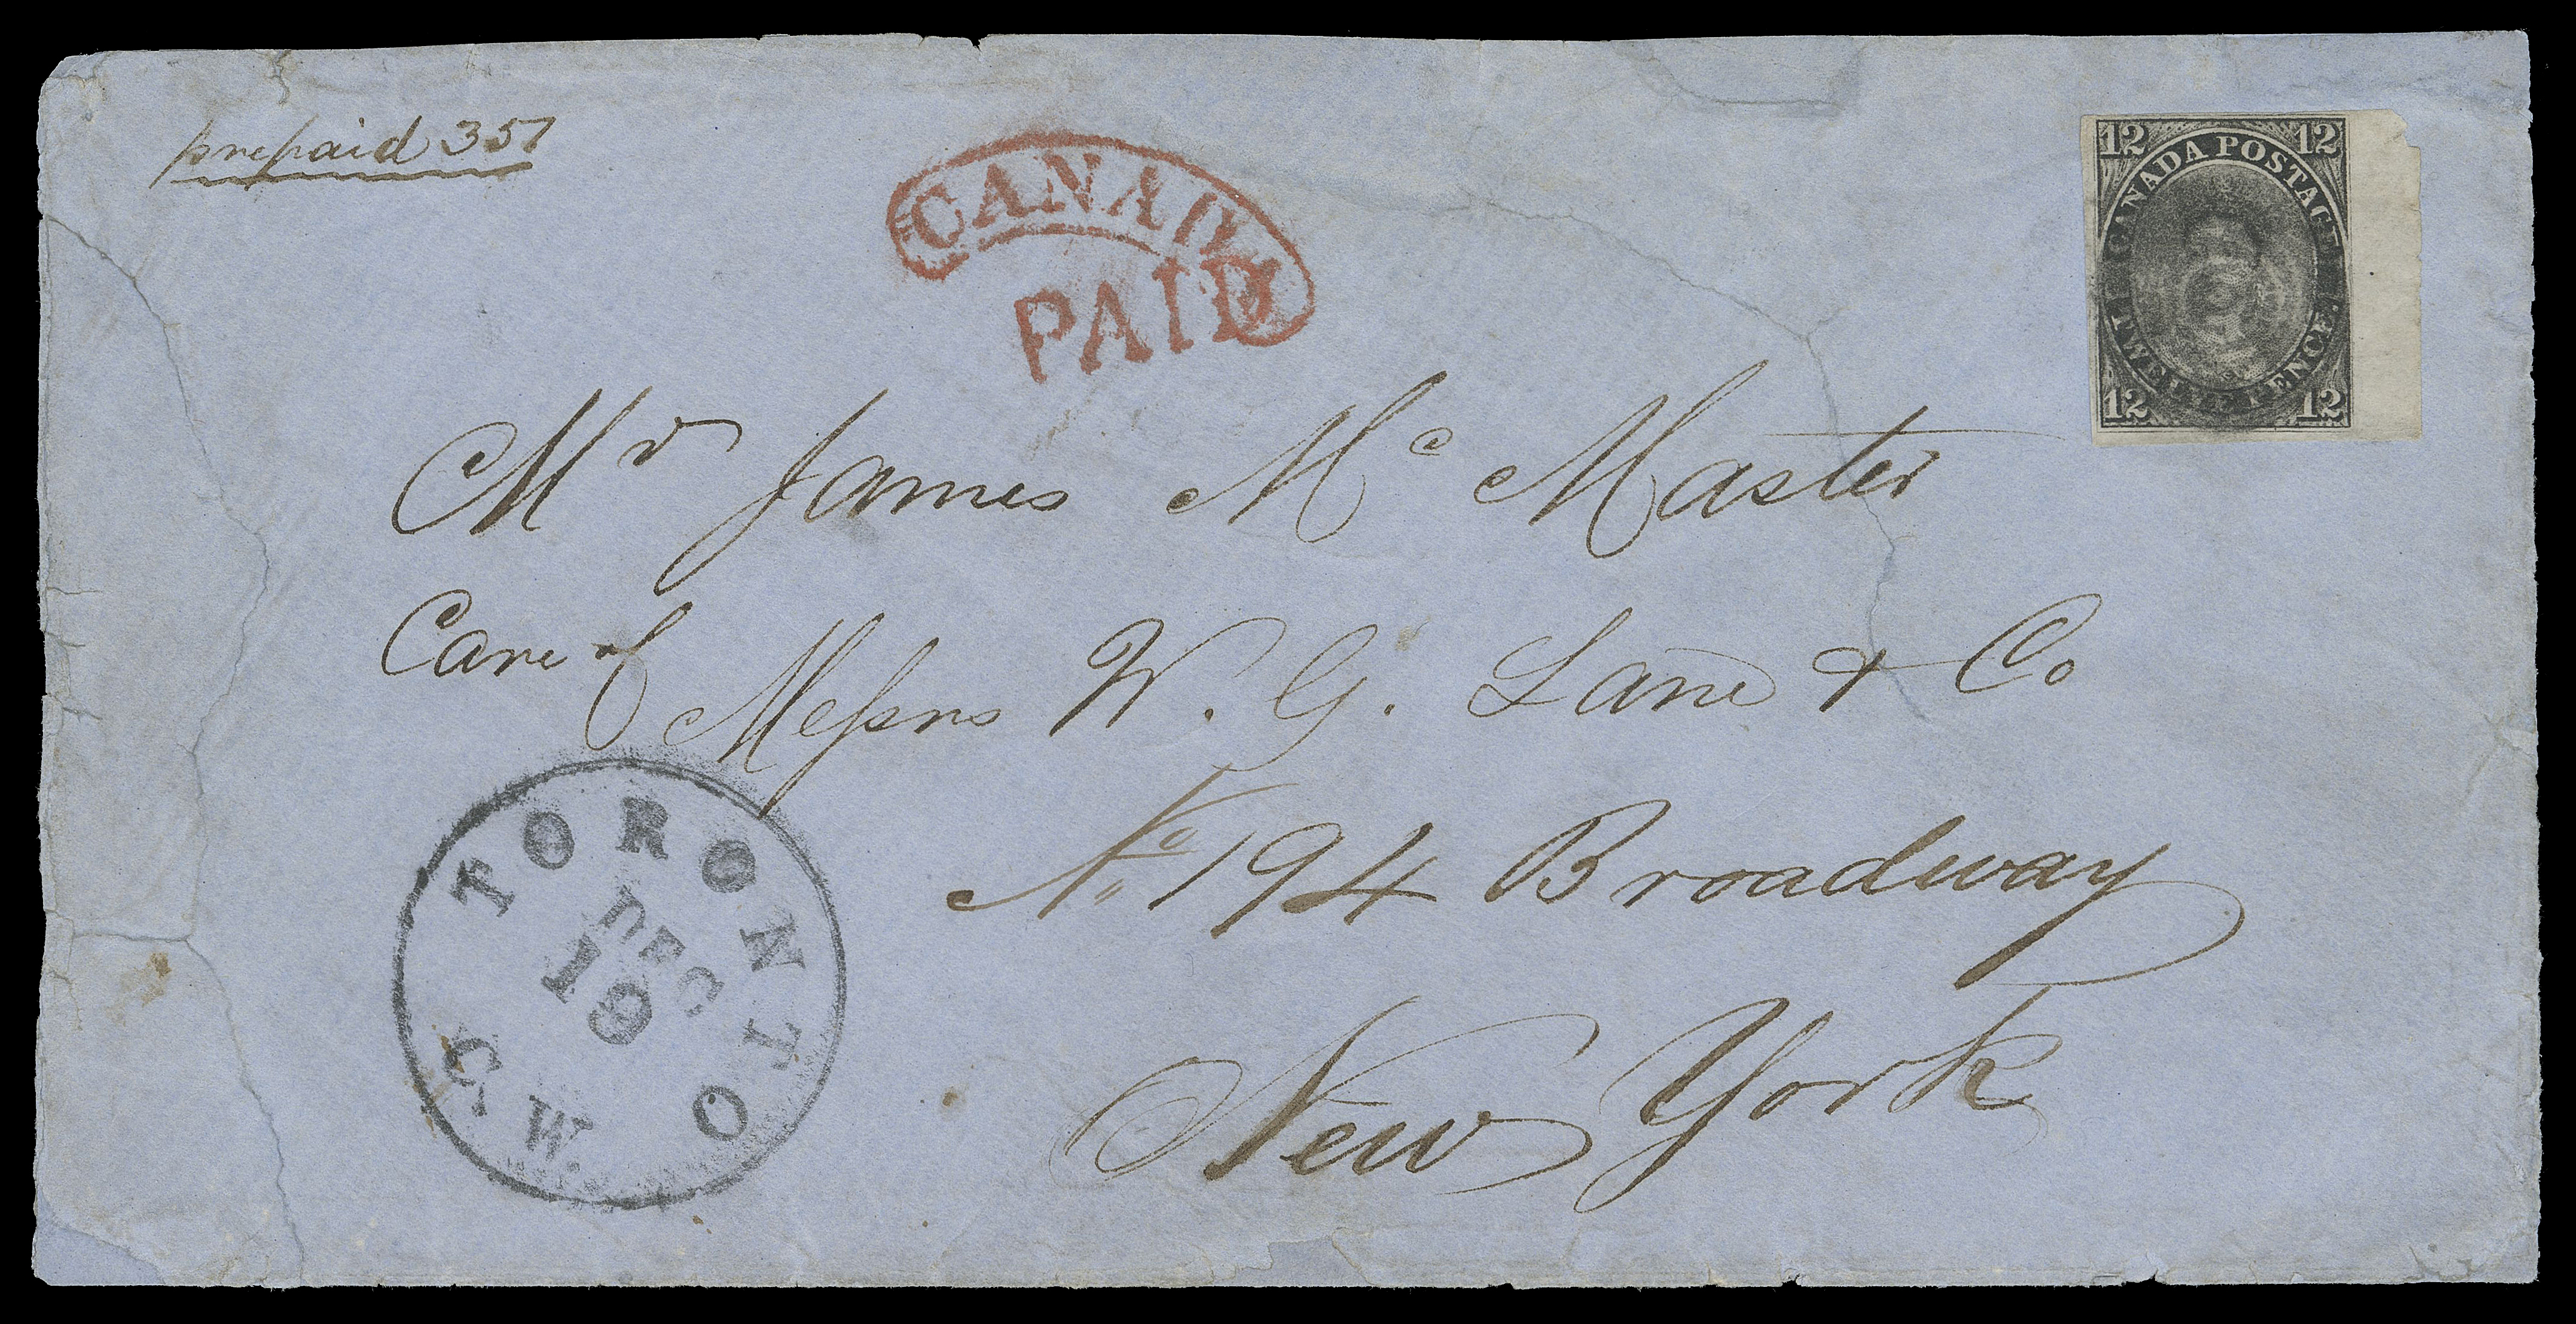 TWELVE PENCE  1855 (December 19) Blue envelope mailed from Toronto to New York, repaired and cleaned, remarkably franked with a 12 pence black without visible laid lines on thin horizontal mesh wove paper, lifted and cleaned with repaired small flaws, clear to ample margins on three sides and large part sheet margin at right, central concentric rings cancel. Large circular Toronto, C.W. DEC 19 dispatch datestamp struck at left along with border exchange "CANADA" arc and "PAID" handstamps in red; on reverse portion of handwritten docketing by receiver reads in part: "Rec... mber 21st 1855" and signed. Despite the imperfections, a great rarity and one of only eight recorded usages of the 12p pence on cover; two of which have not been seen in a century. A Fine appearing example of this great rarity (Unitrade 3; cat. $300,000)

Expertization: 1958 & 1993 RPS of London certificates, the latter identifying it as "SG No. 16"

Provenance: The "Pipkin" Collection, Sissons Sale 338, June 1974; Lot 25
Kasimir Bileski (purchased in 1980s)
The "Lindemann" Collection (private treaty, circa. 1997)

Literature: Illustrated on the front cover of BNA Topics, Whole 521, Volume 66, No. 4, October - December 2009.
Illustrated in Winthrop Boggs "The Postage Stamps and Postal History of Canada" handbook on page 138 (Figure 12).
Illustrated in Arfken, Leggett, Firby, Steinhart "Canada